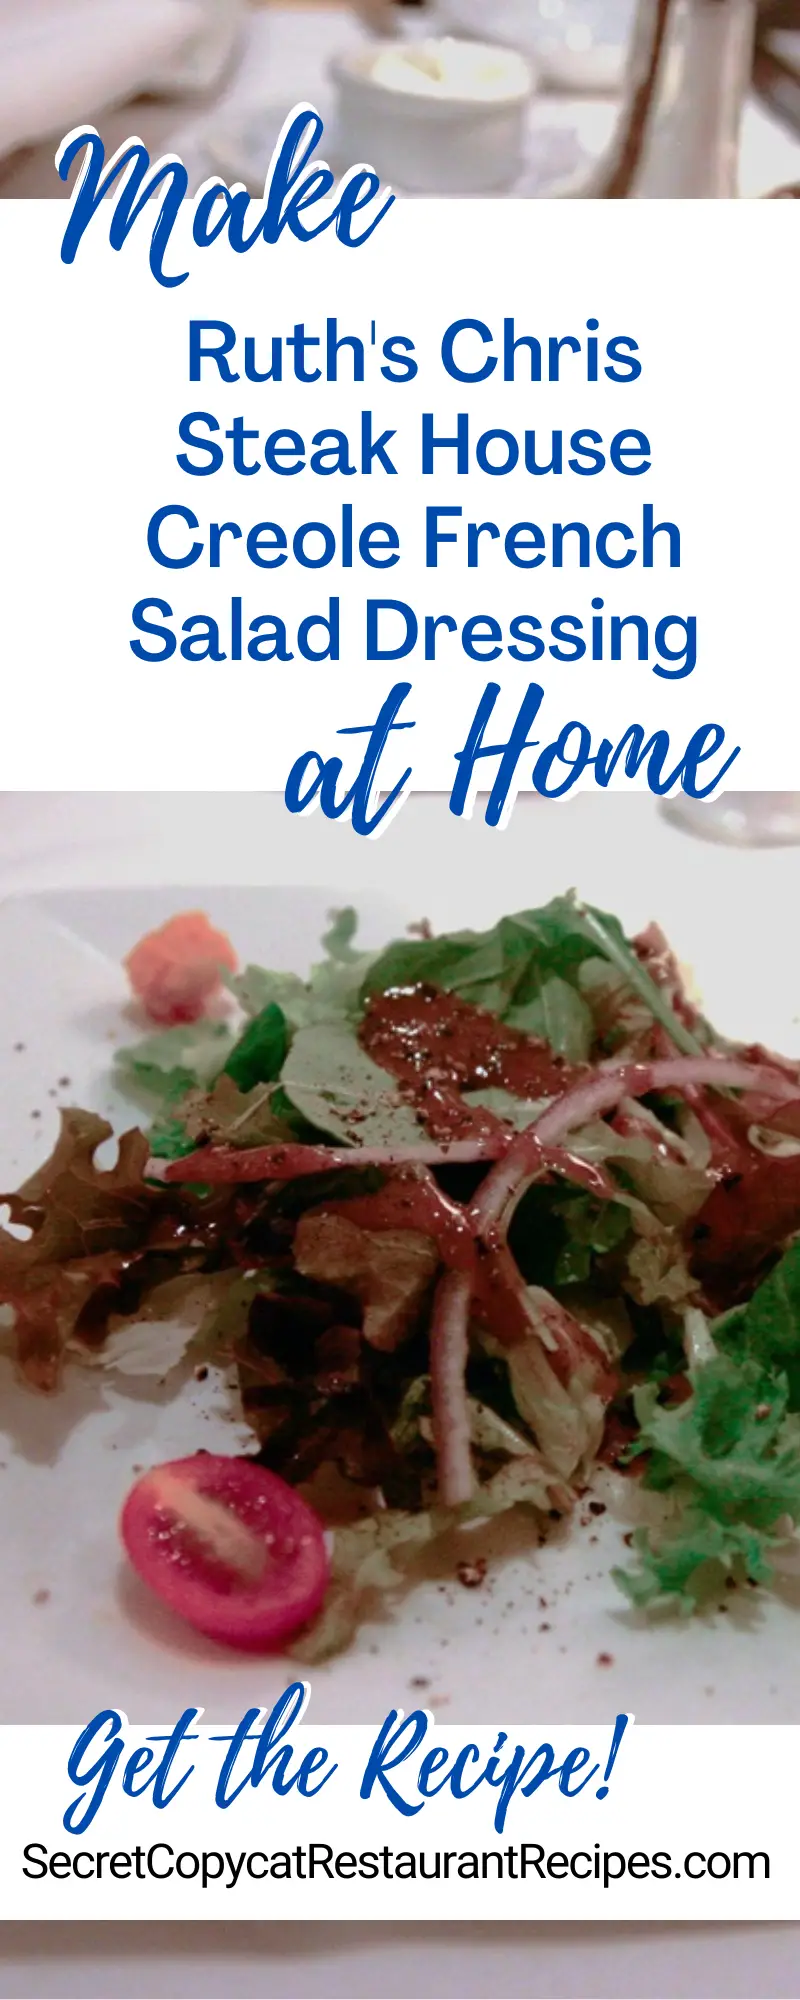 Ruth's Chris Steak House Creole French Salad Dressing Recipe